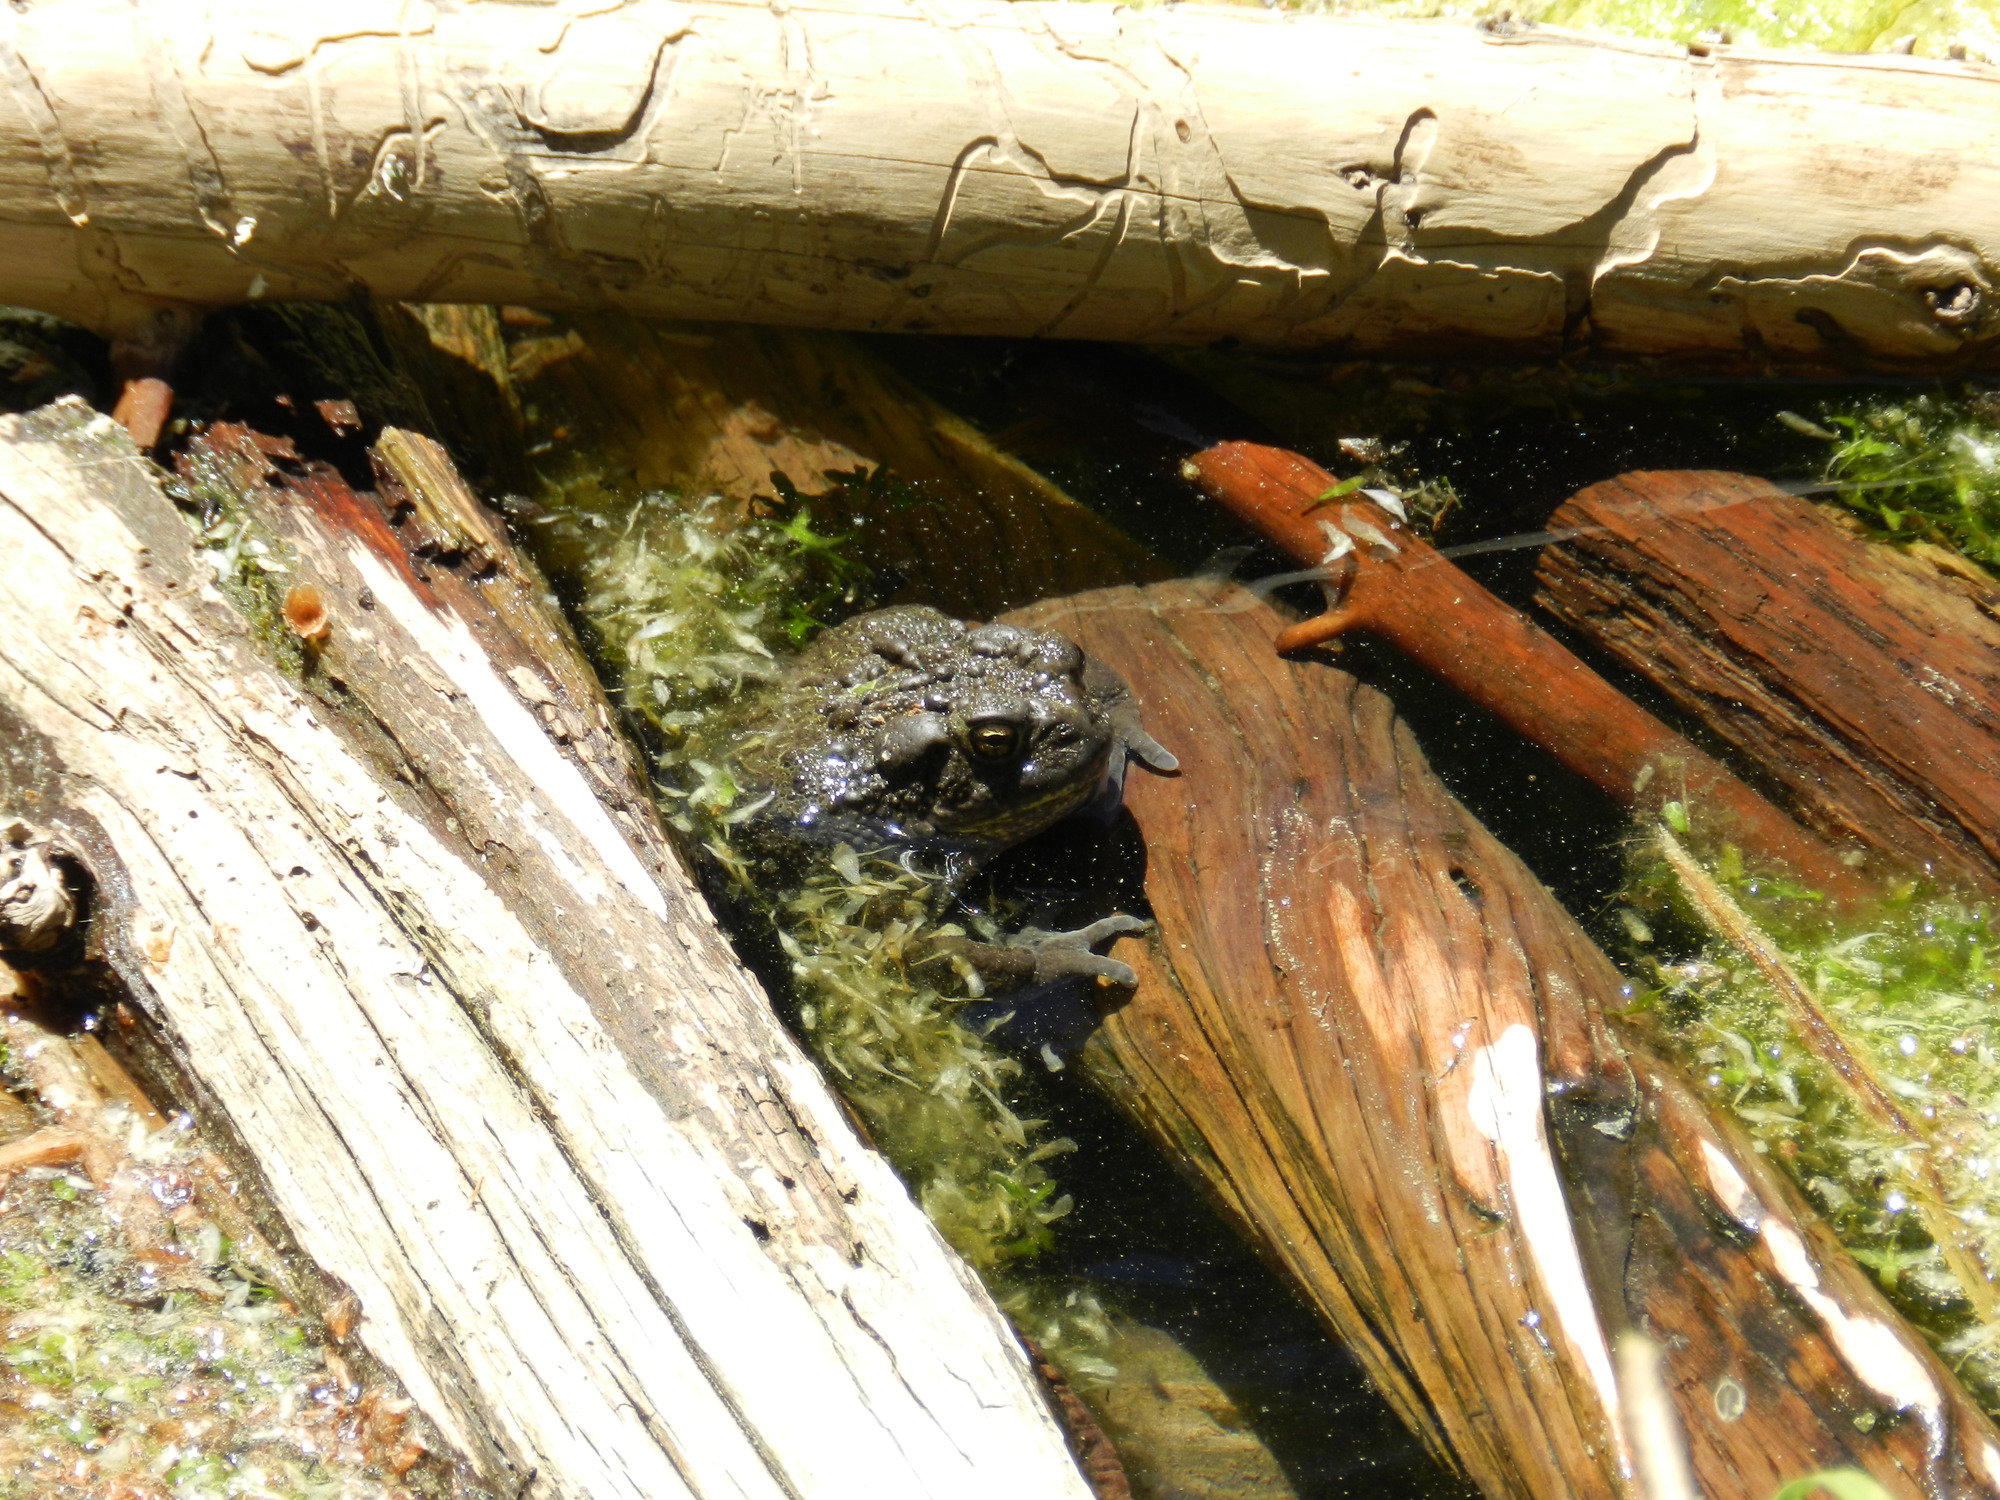 Large toad rests in water between several logs